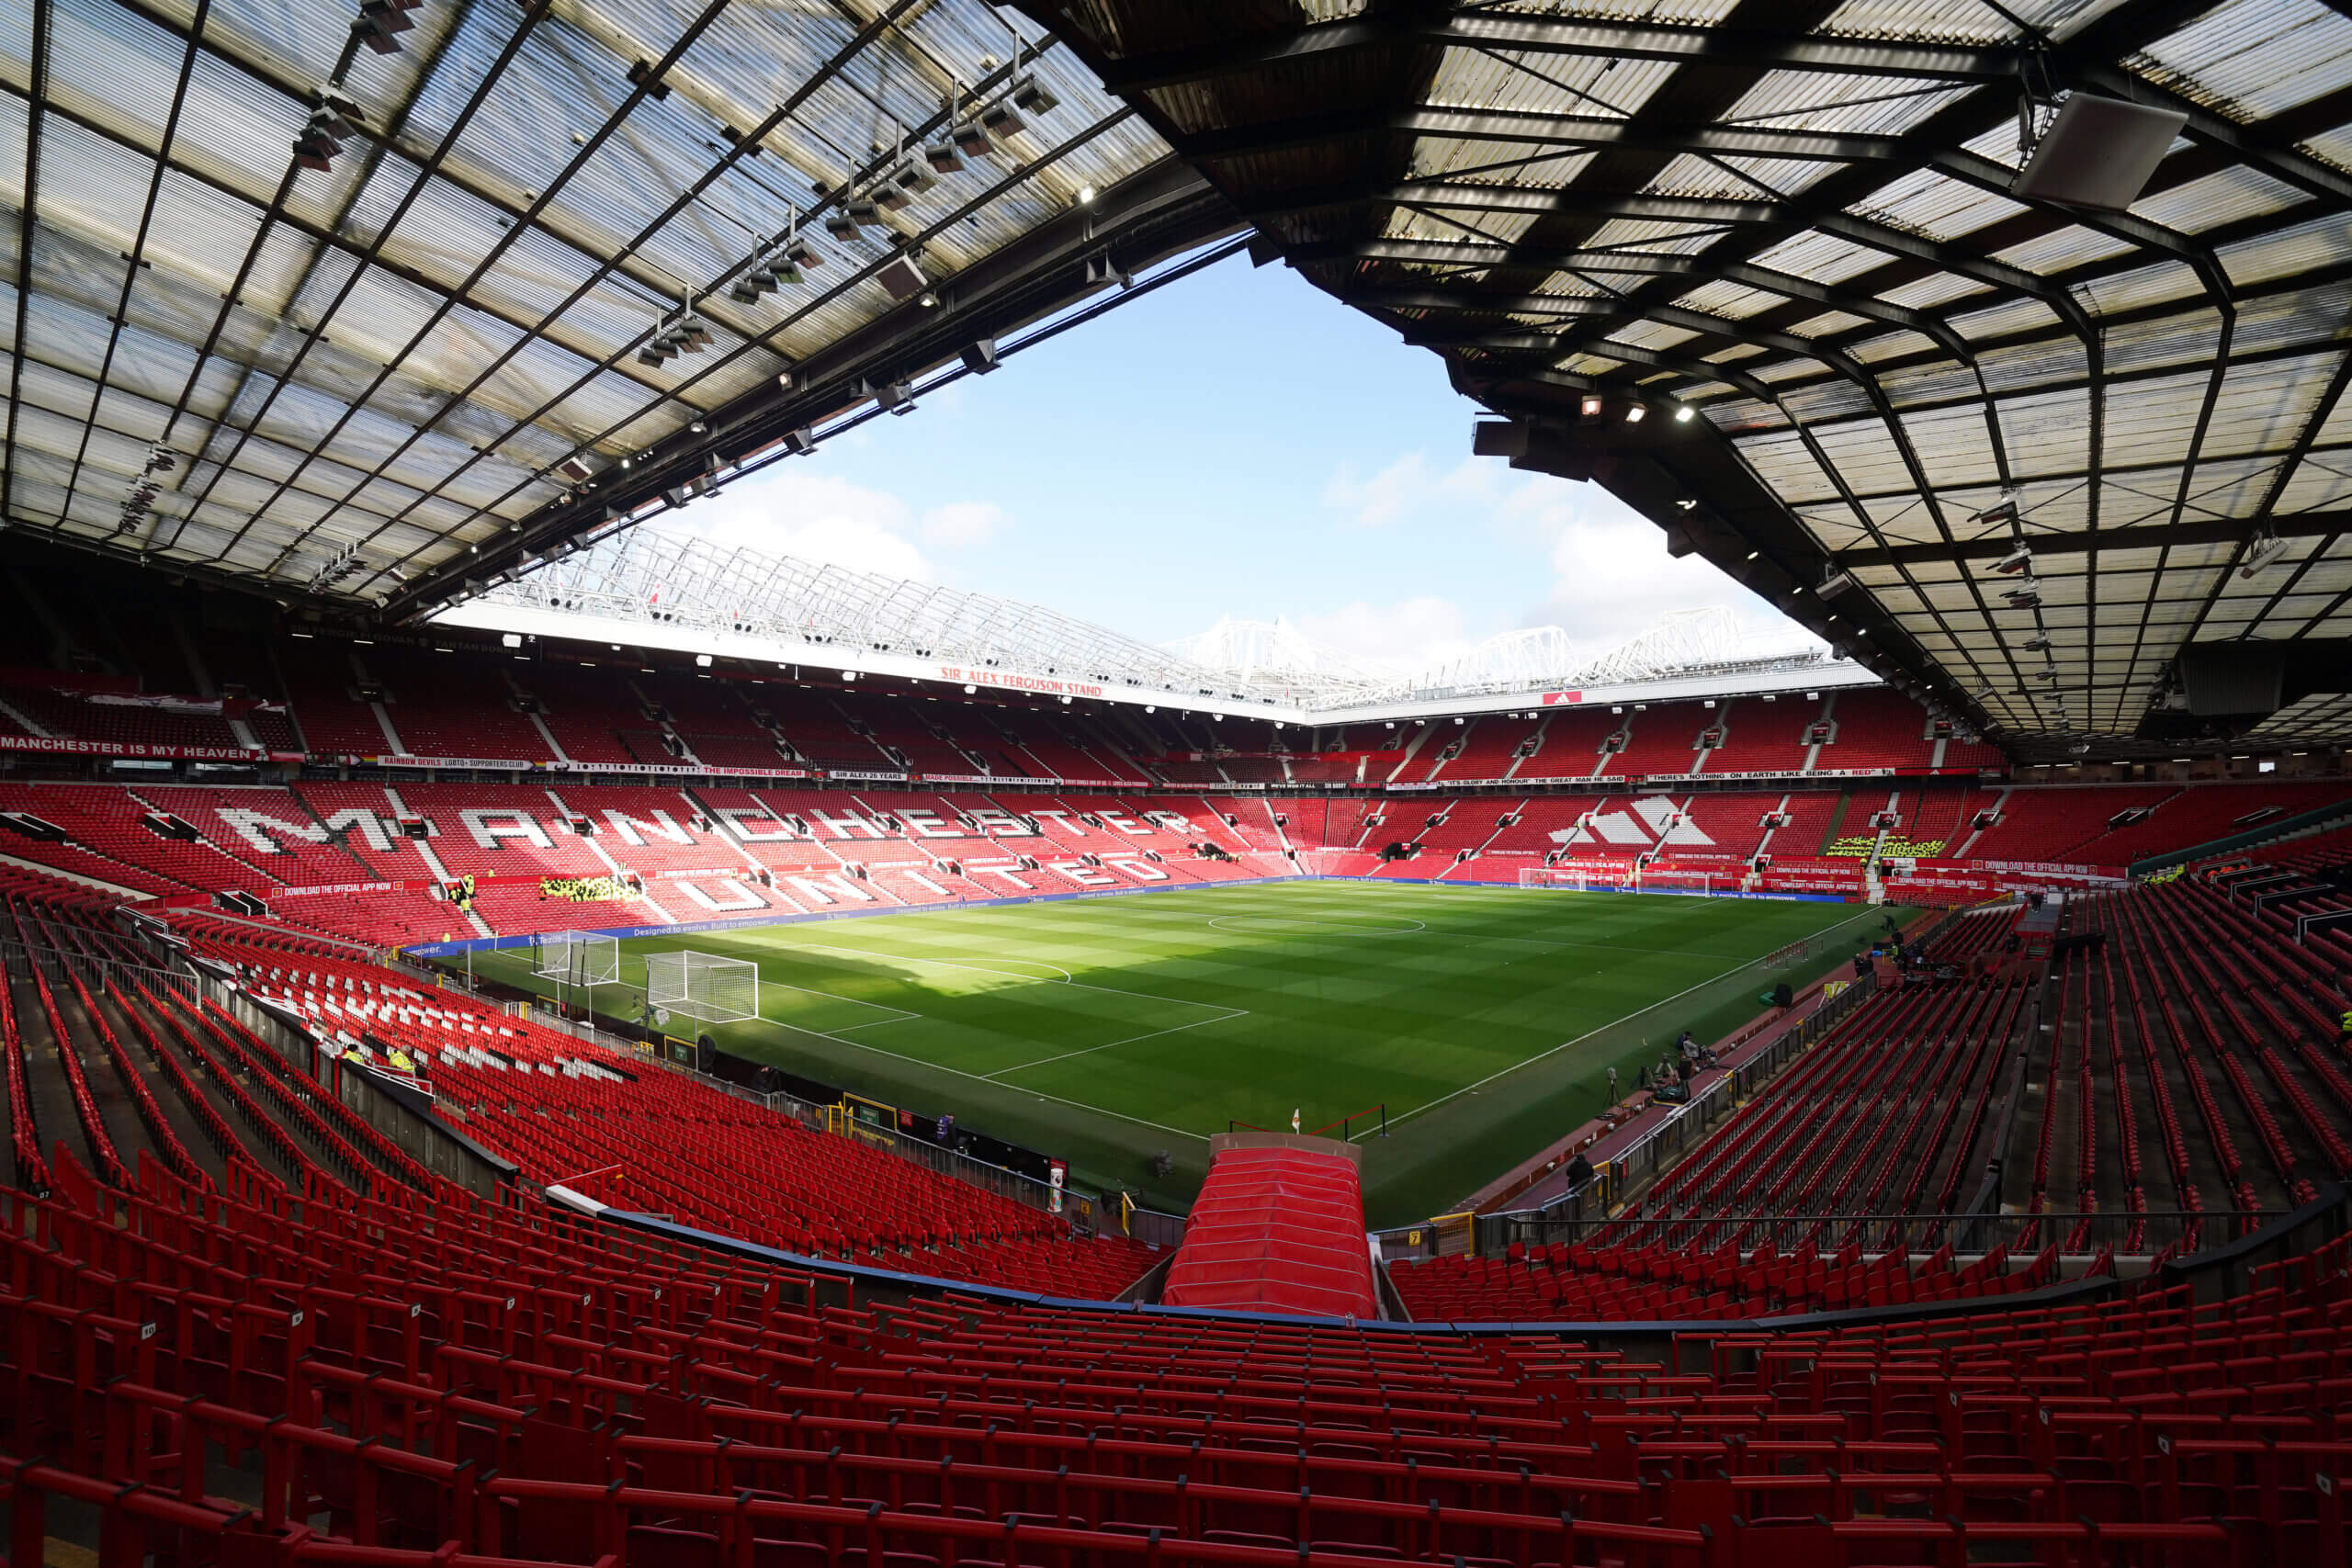 Manchester United named world’s most valuable football club; 20 MLS teams in top 50